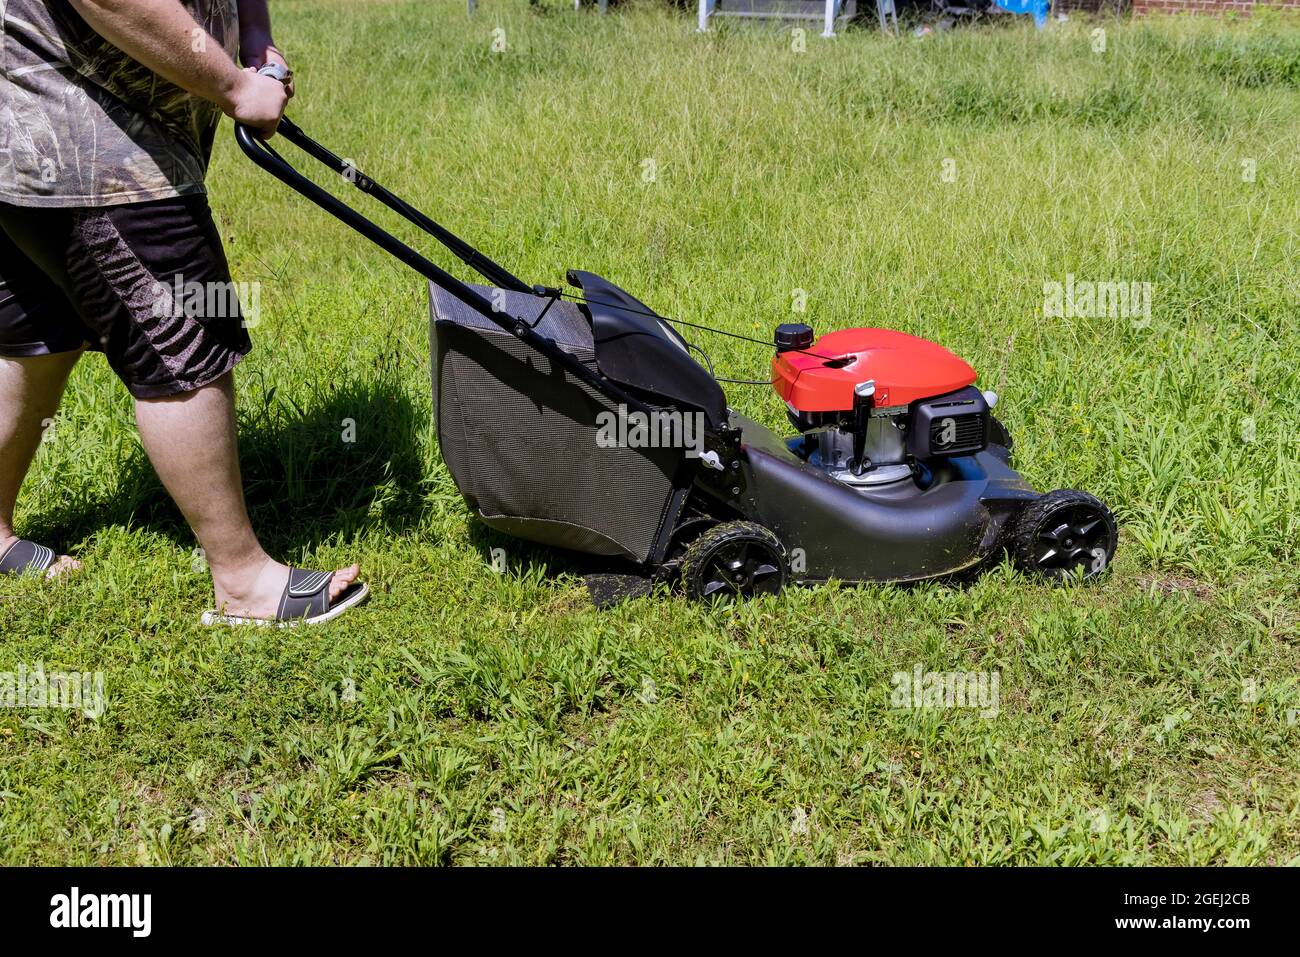 Working lawn mower on green lawn with trimmed grass in garden care work tool Stock Photo